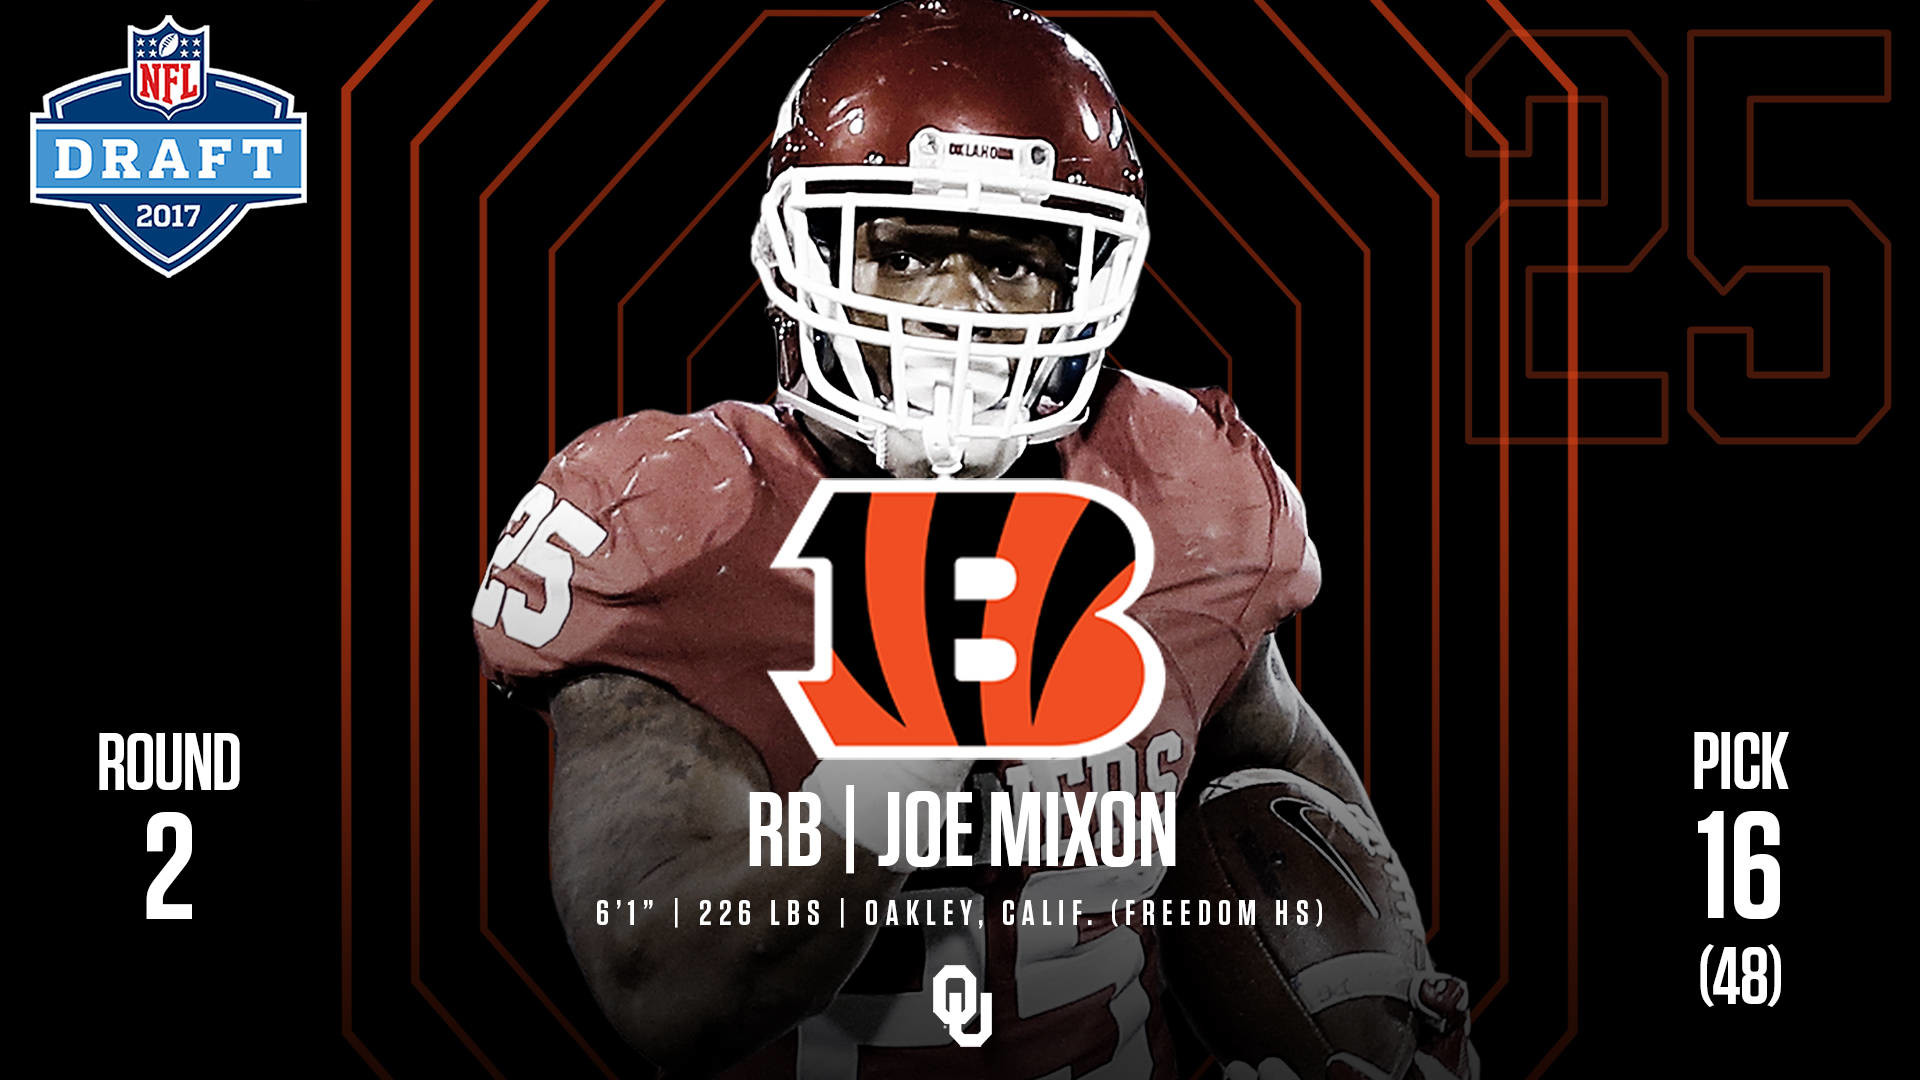 1920x1080 Mixon Goes to Bengals in NFL Draft Second Round